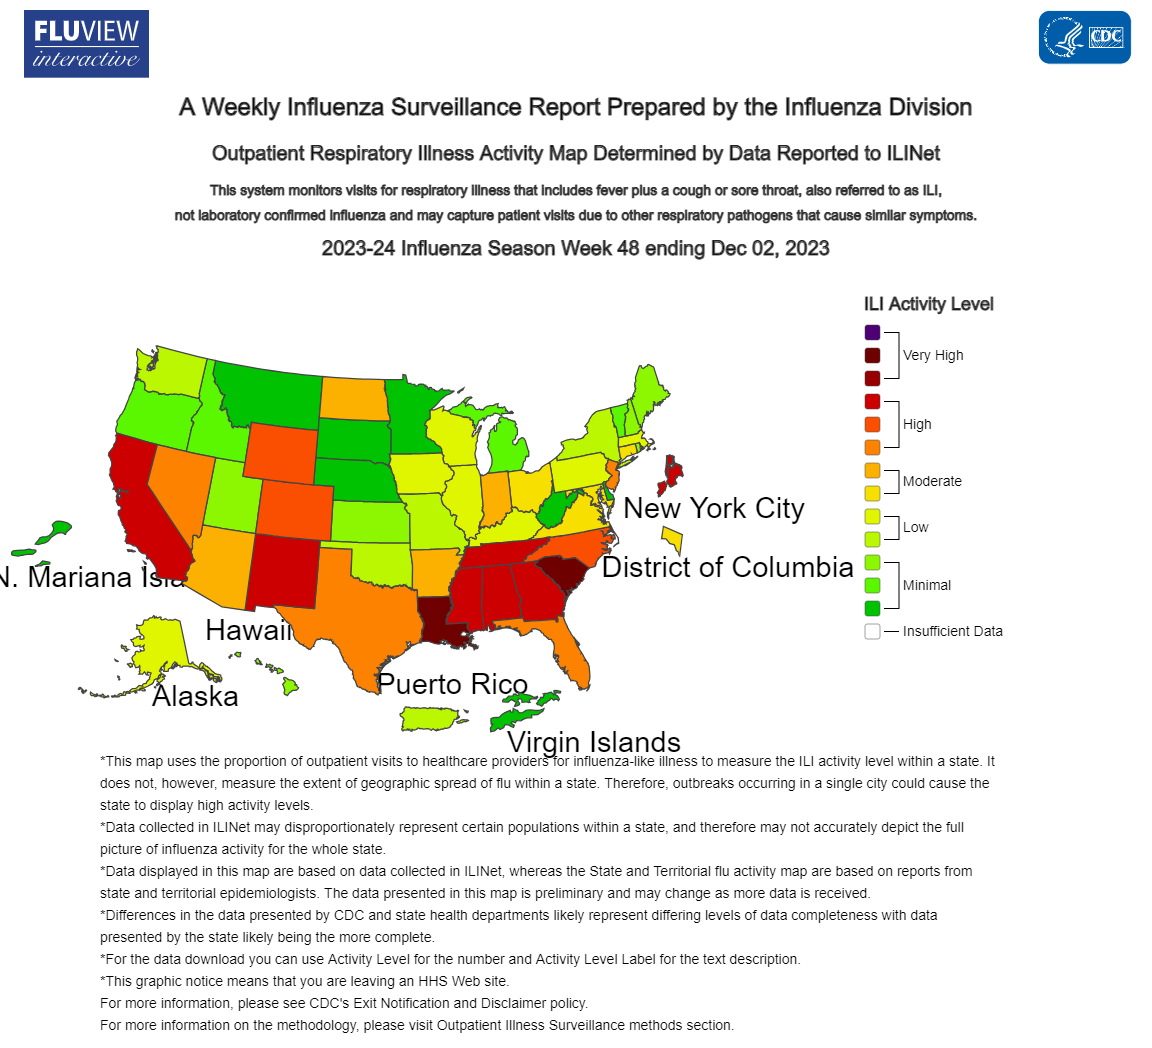 A map by the CDC outlining influenza like illness in the United States for the 2023-2024 season.